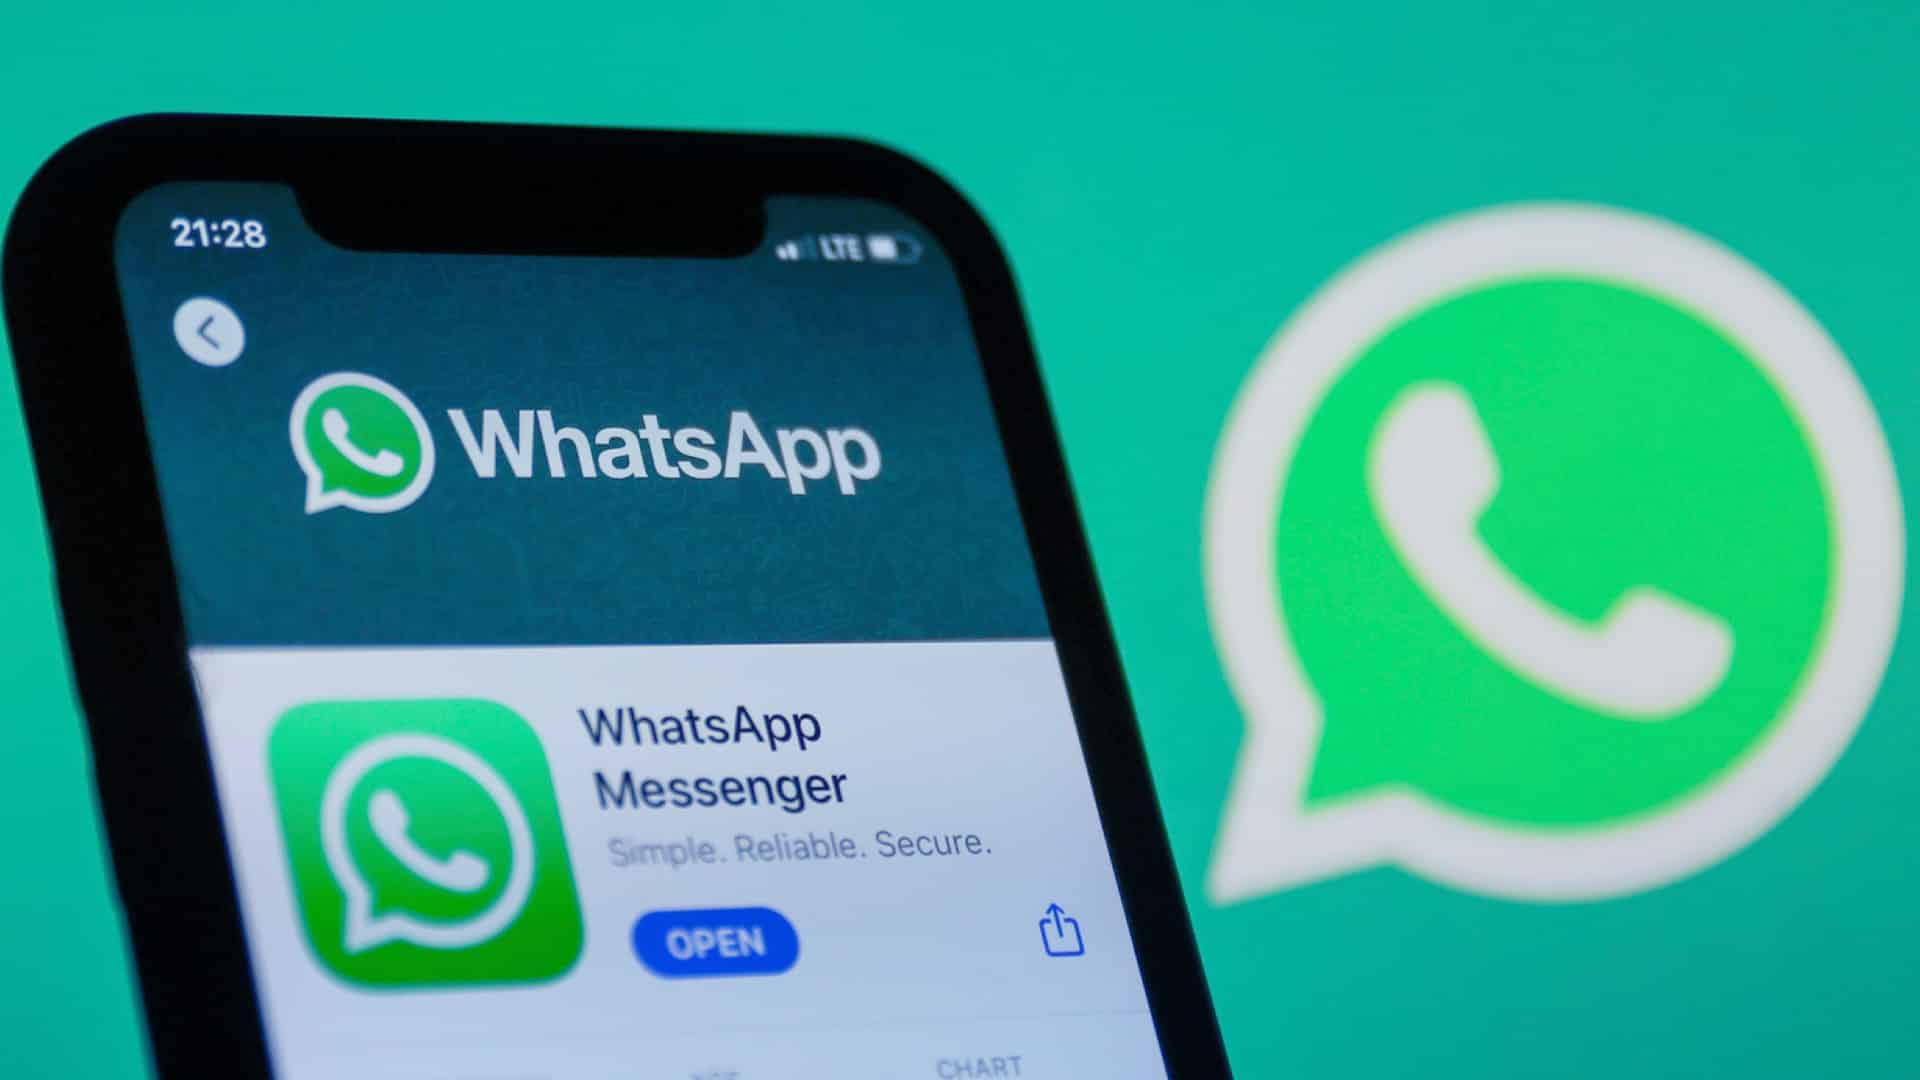 WhatsApp users need to switch on old phone for verification to use app on new device